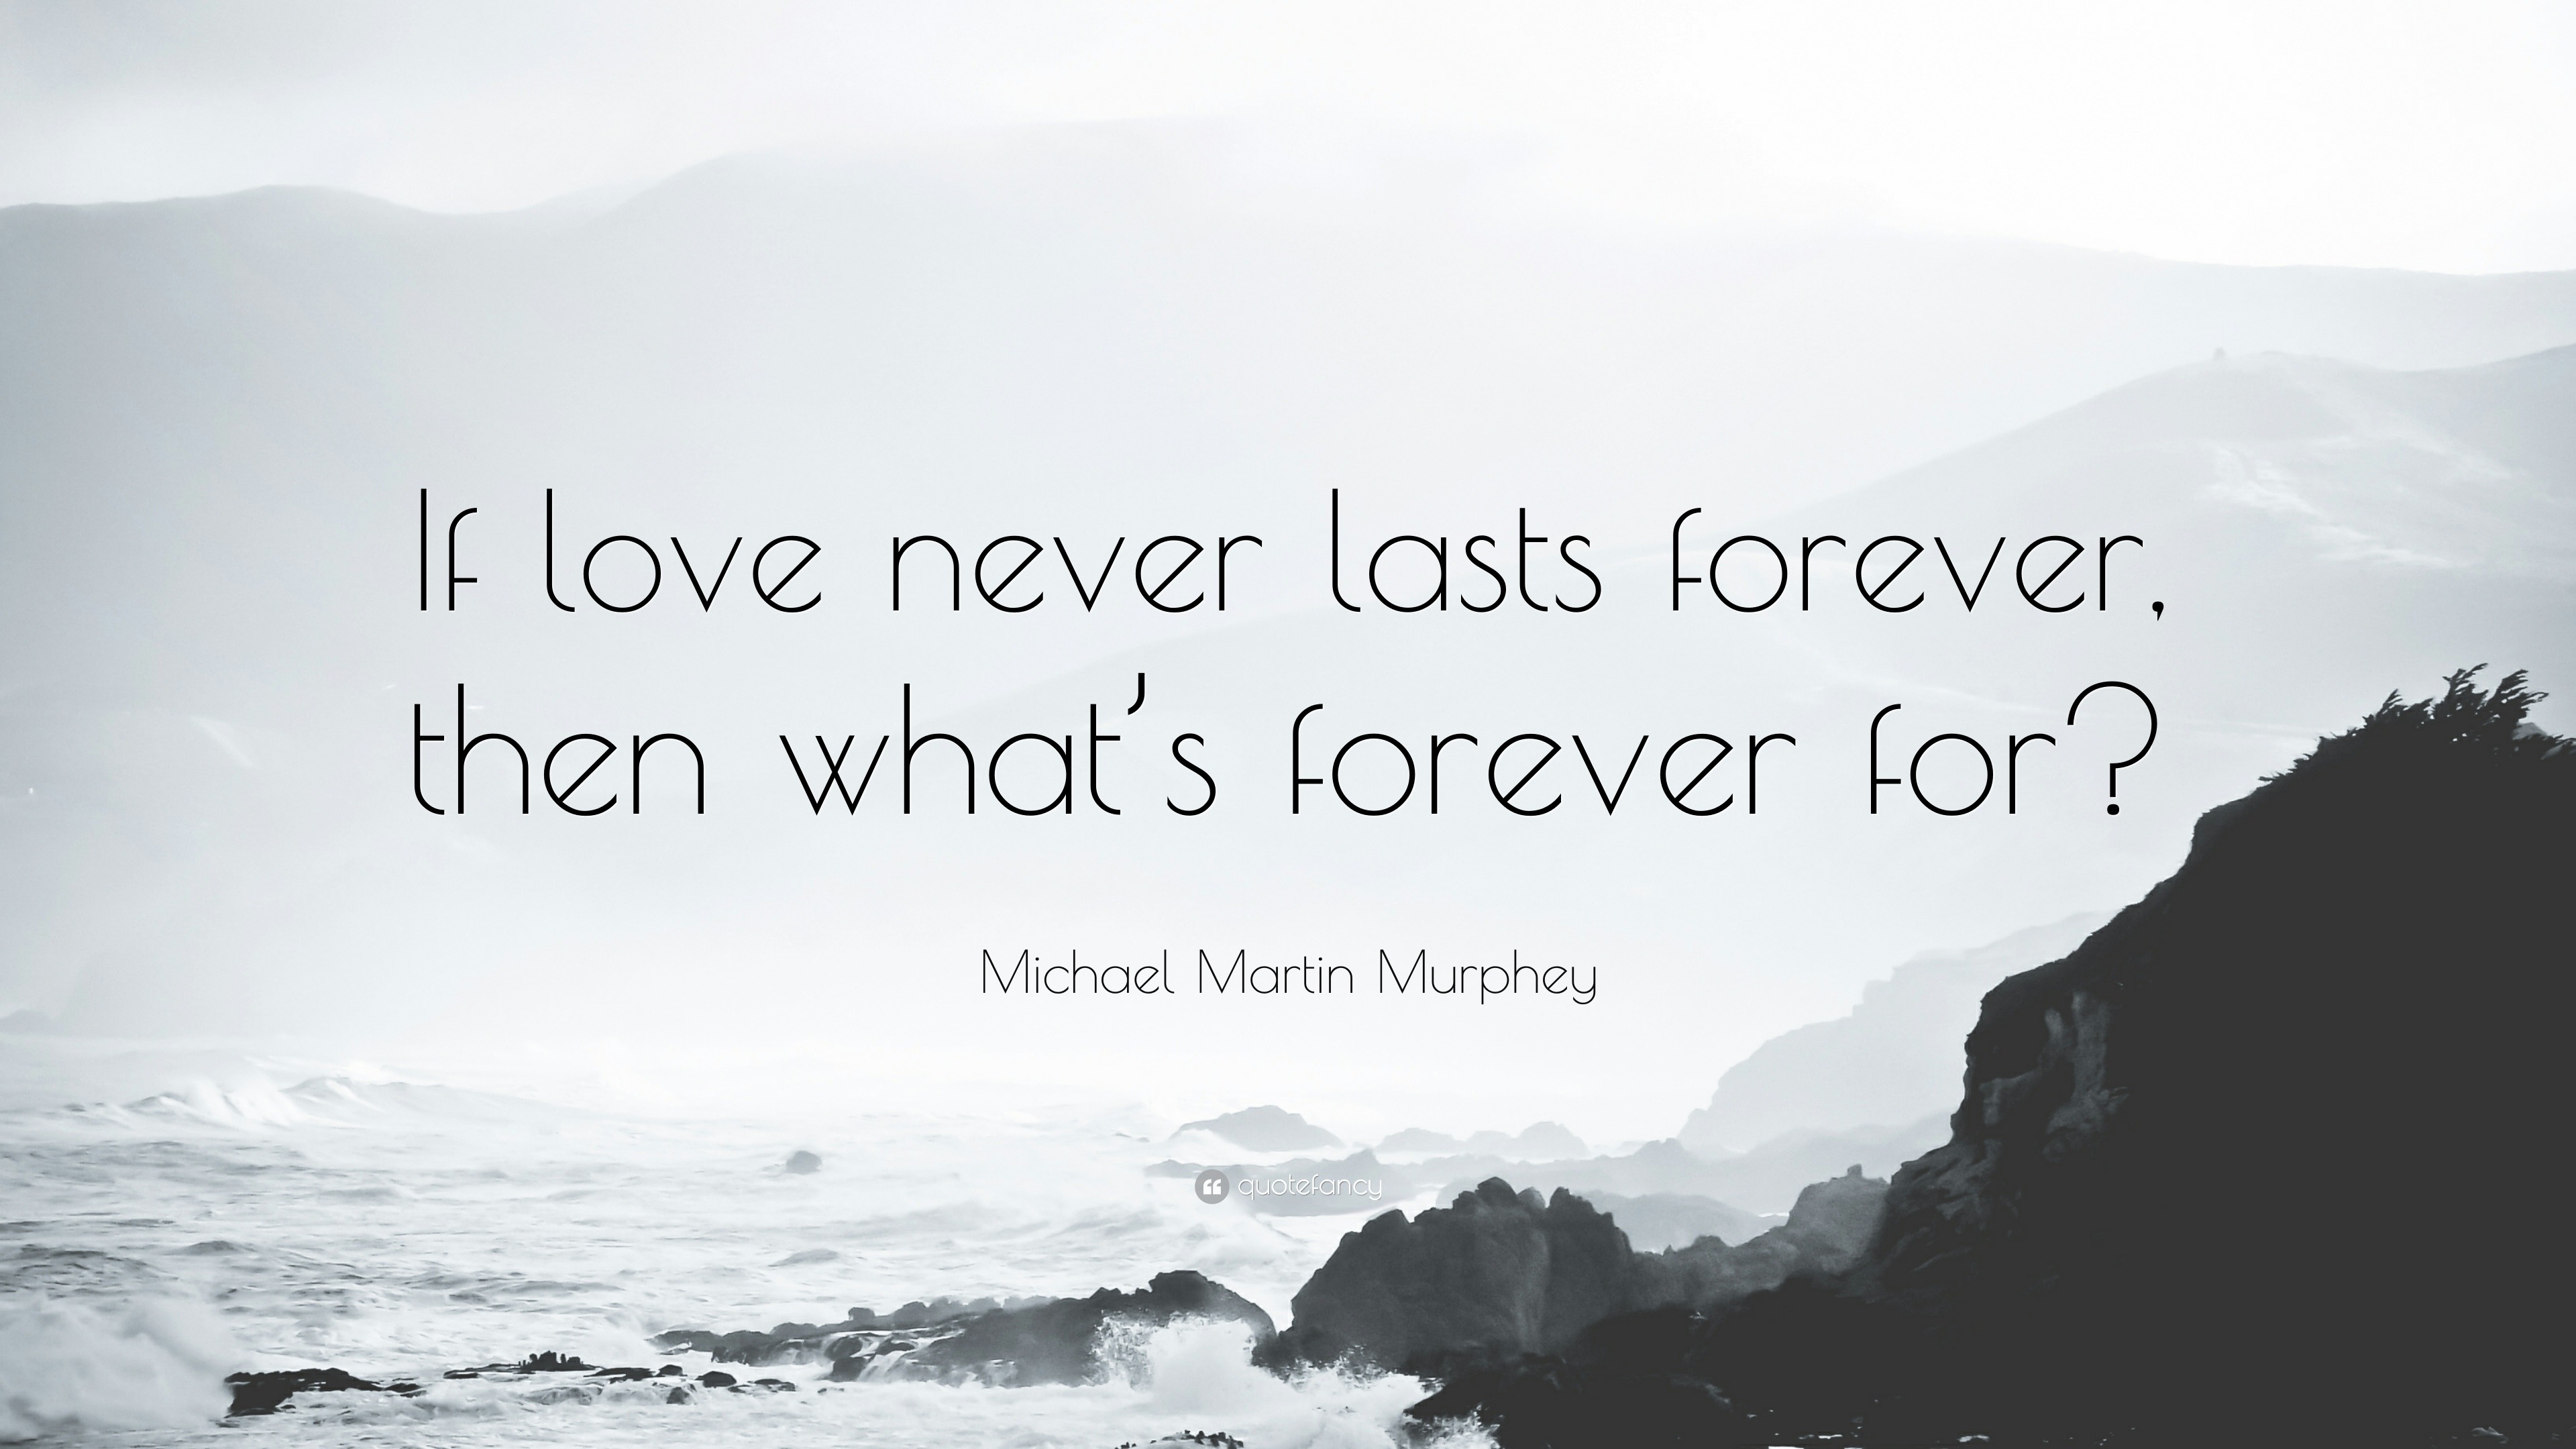 Michael Martin Murphey Quote “If love never lasts forever then what s forever for